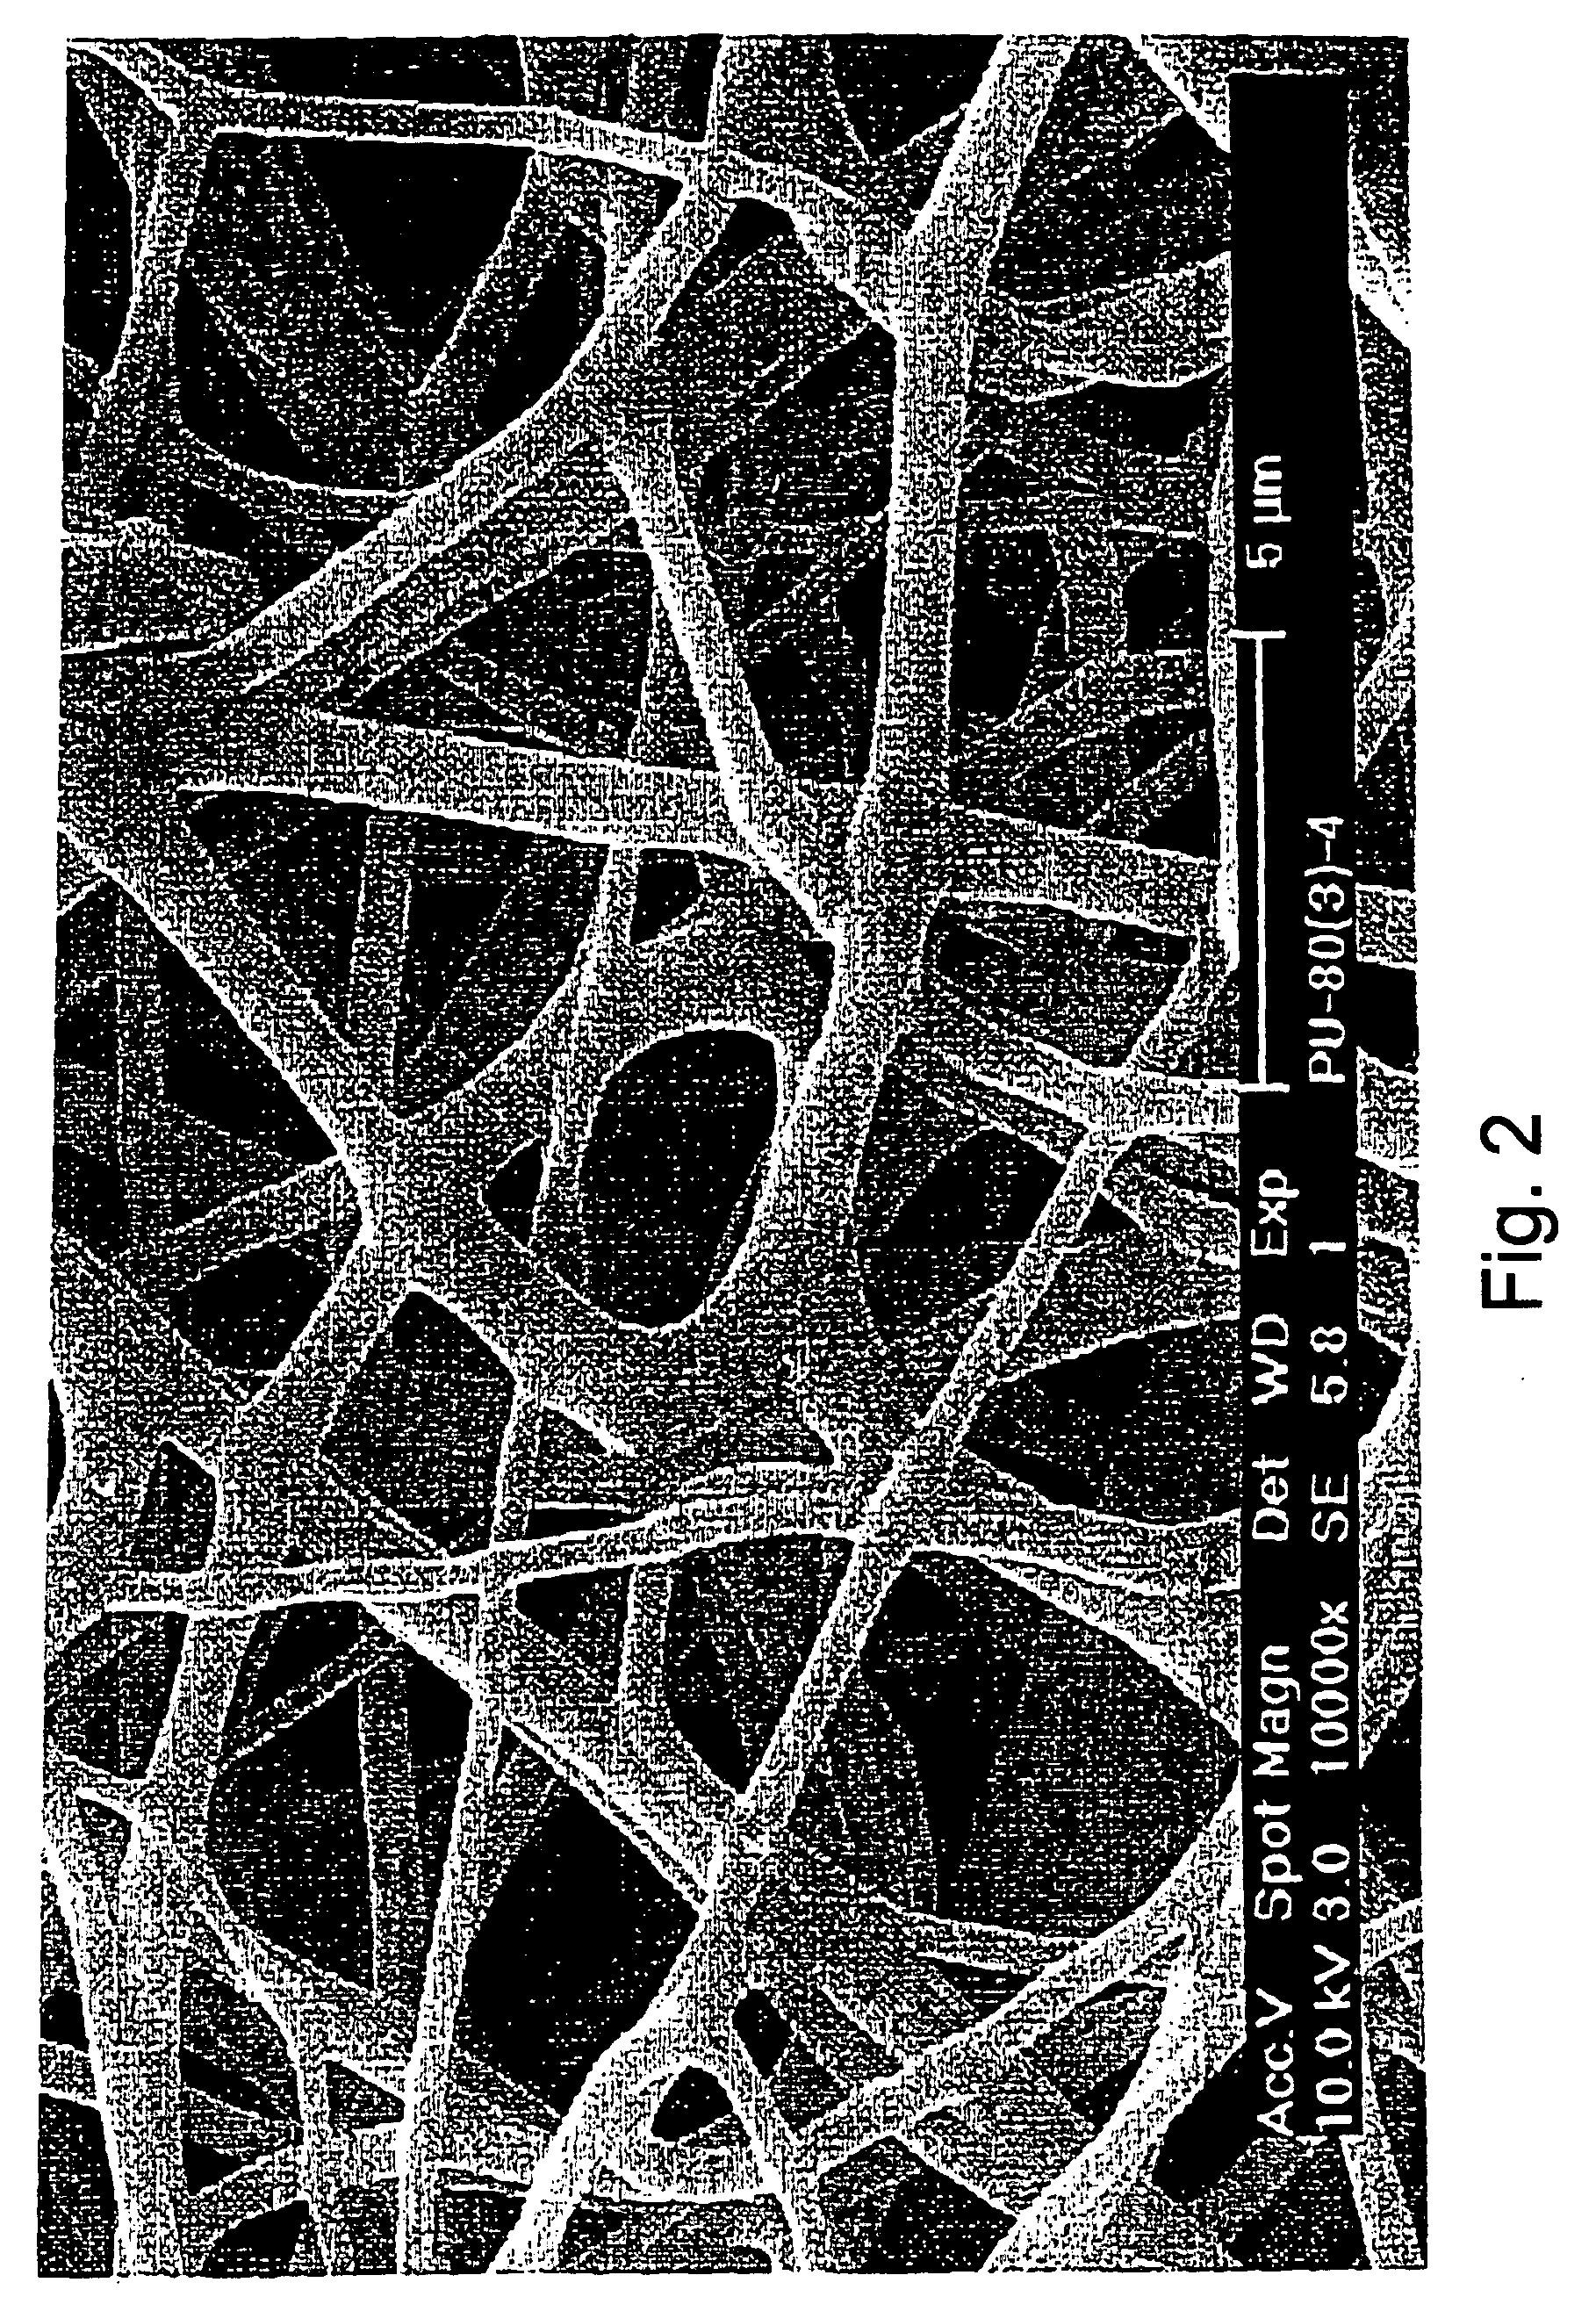 Vascular prosthesis and method for production thereof